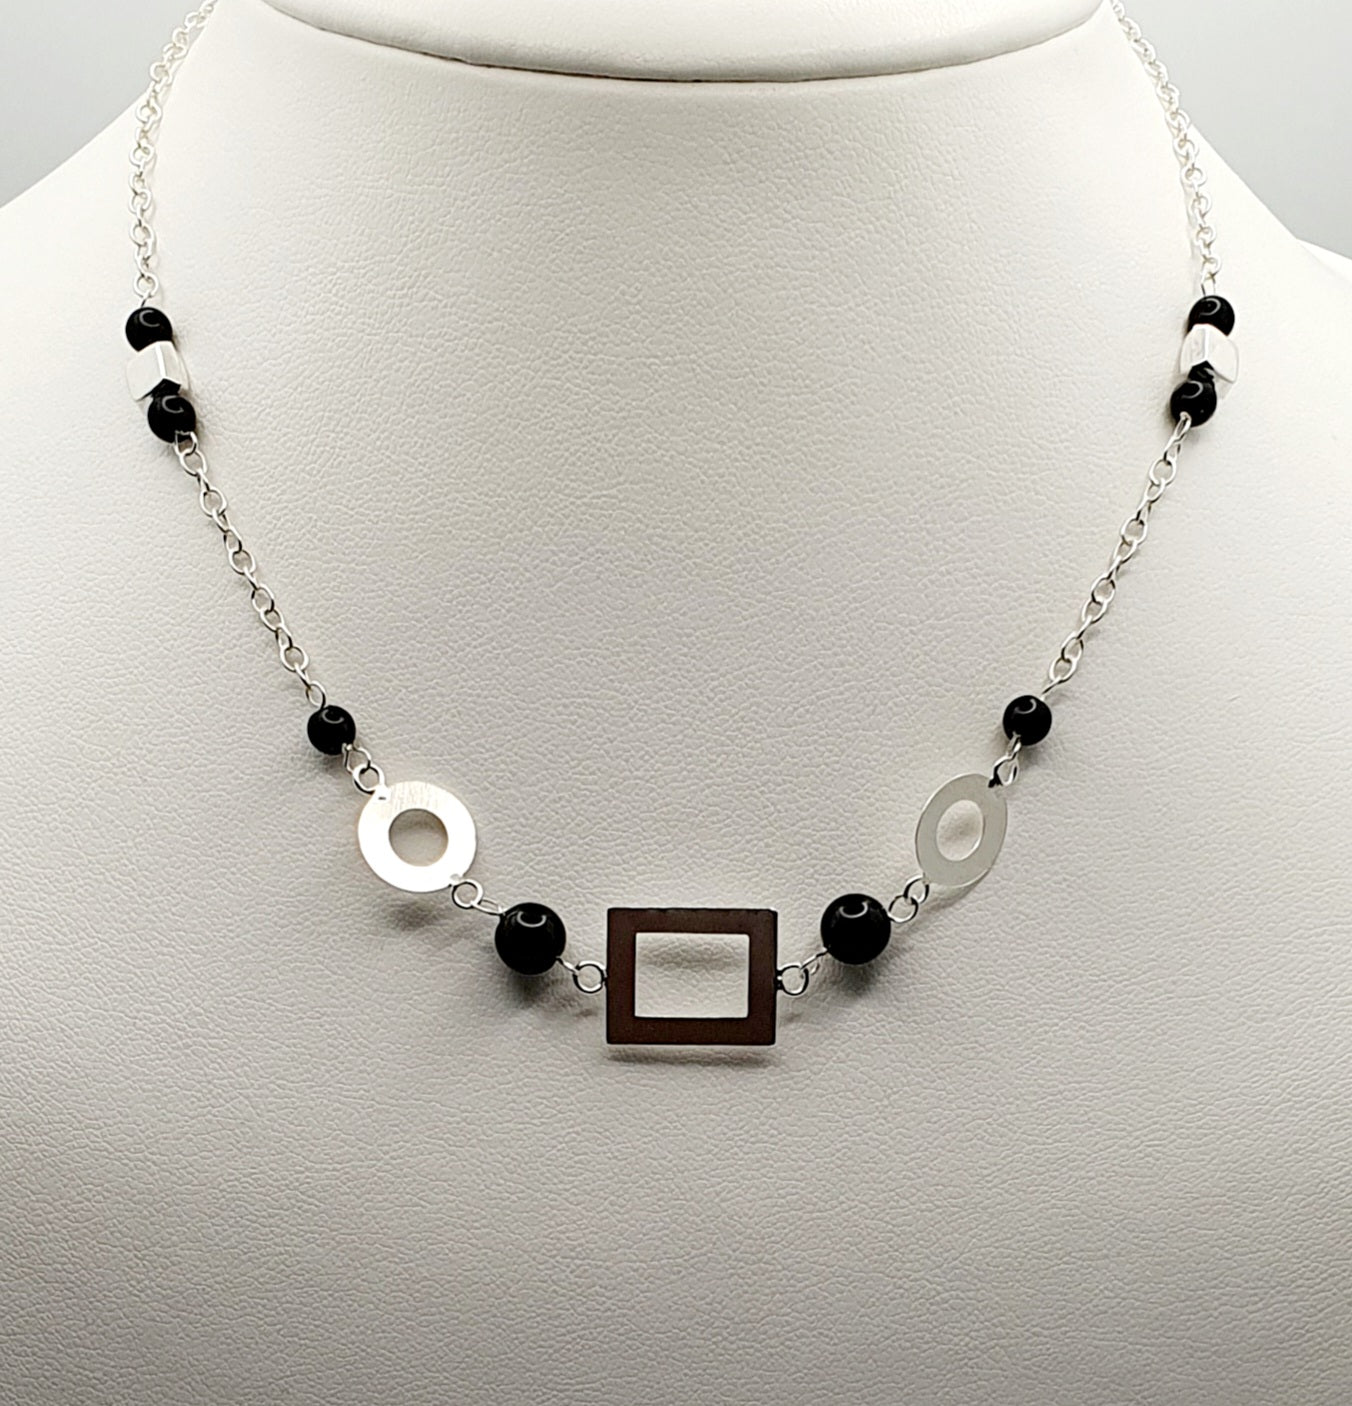 Sterling Silver Onyx Bead Necklace with Silver Circle and Square Matte Accents 87.5cm